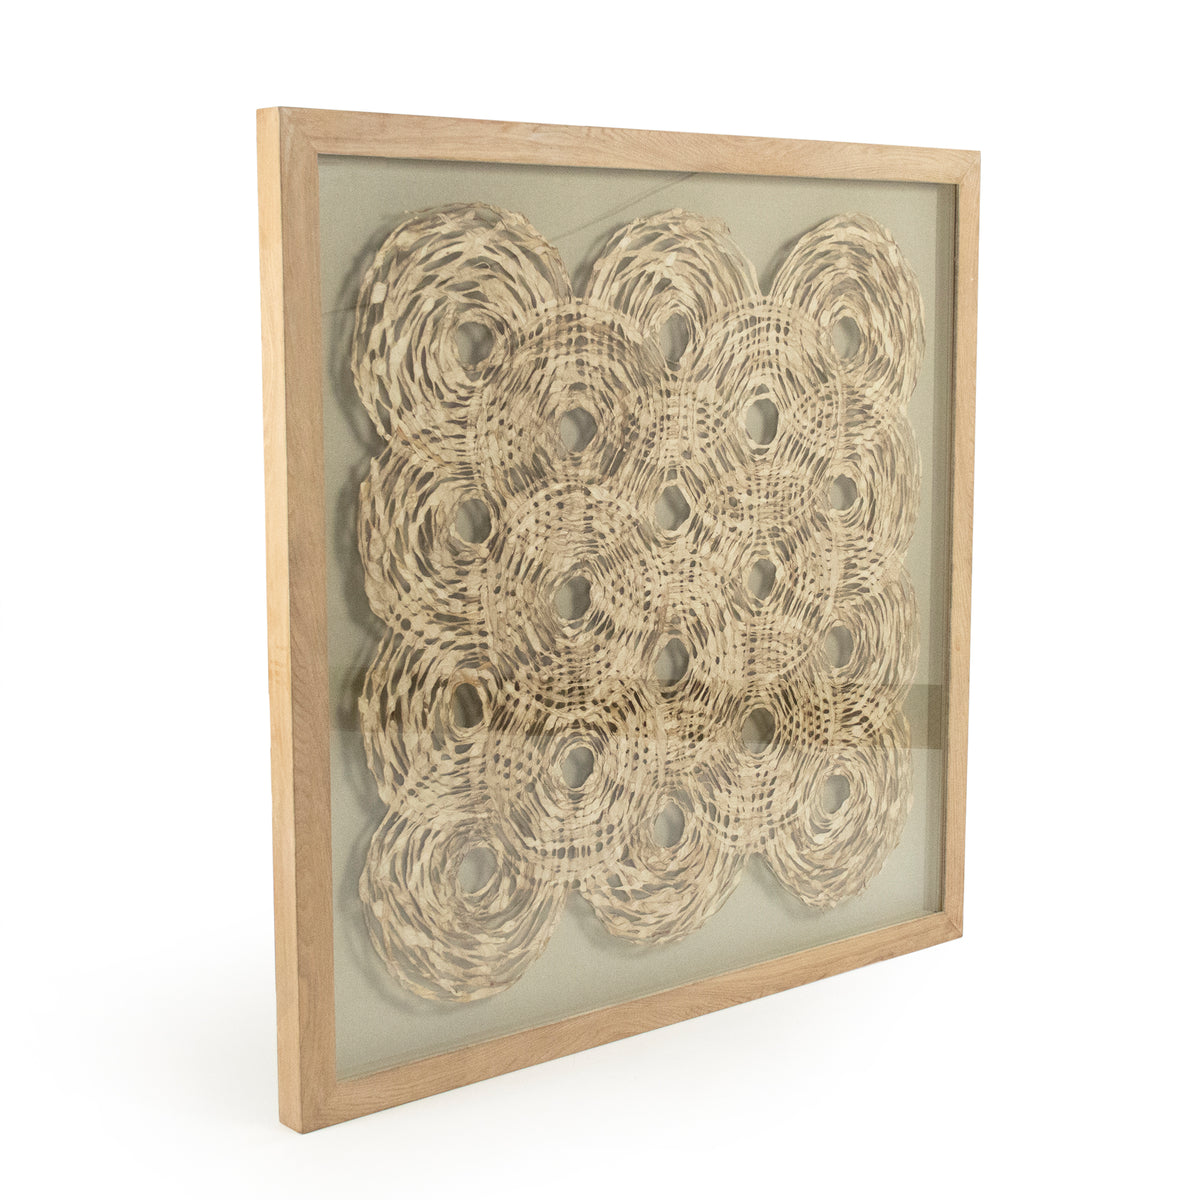 Abstract Paper Framed Art by Zentique